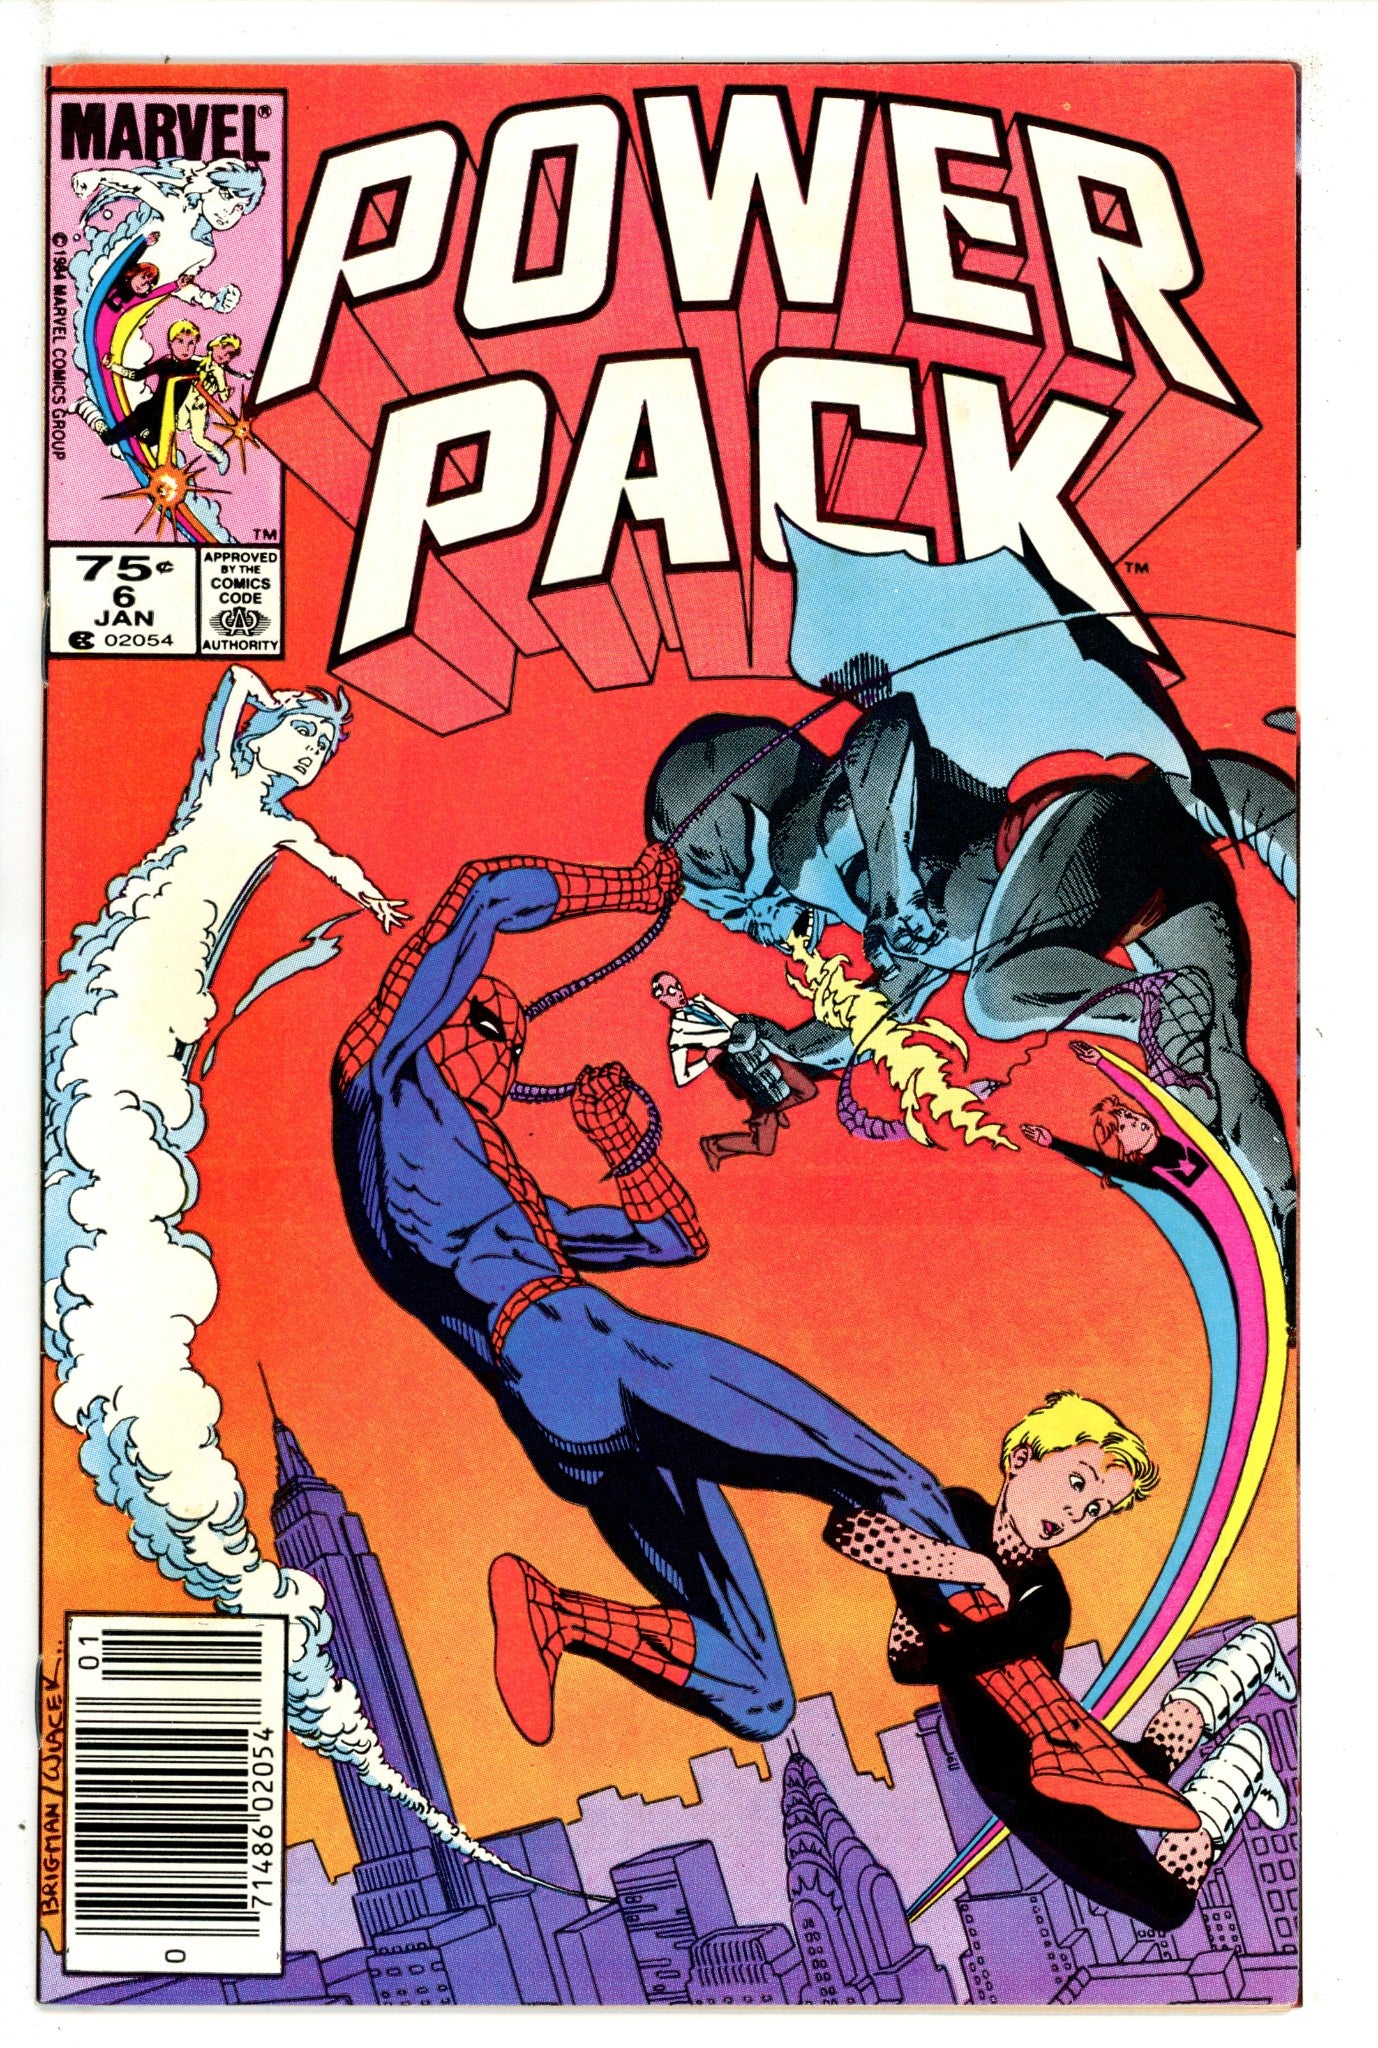 Power Pack Vol 1 6 Canadian Price Variant FN/VF (1985)